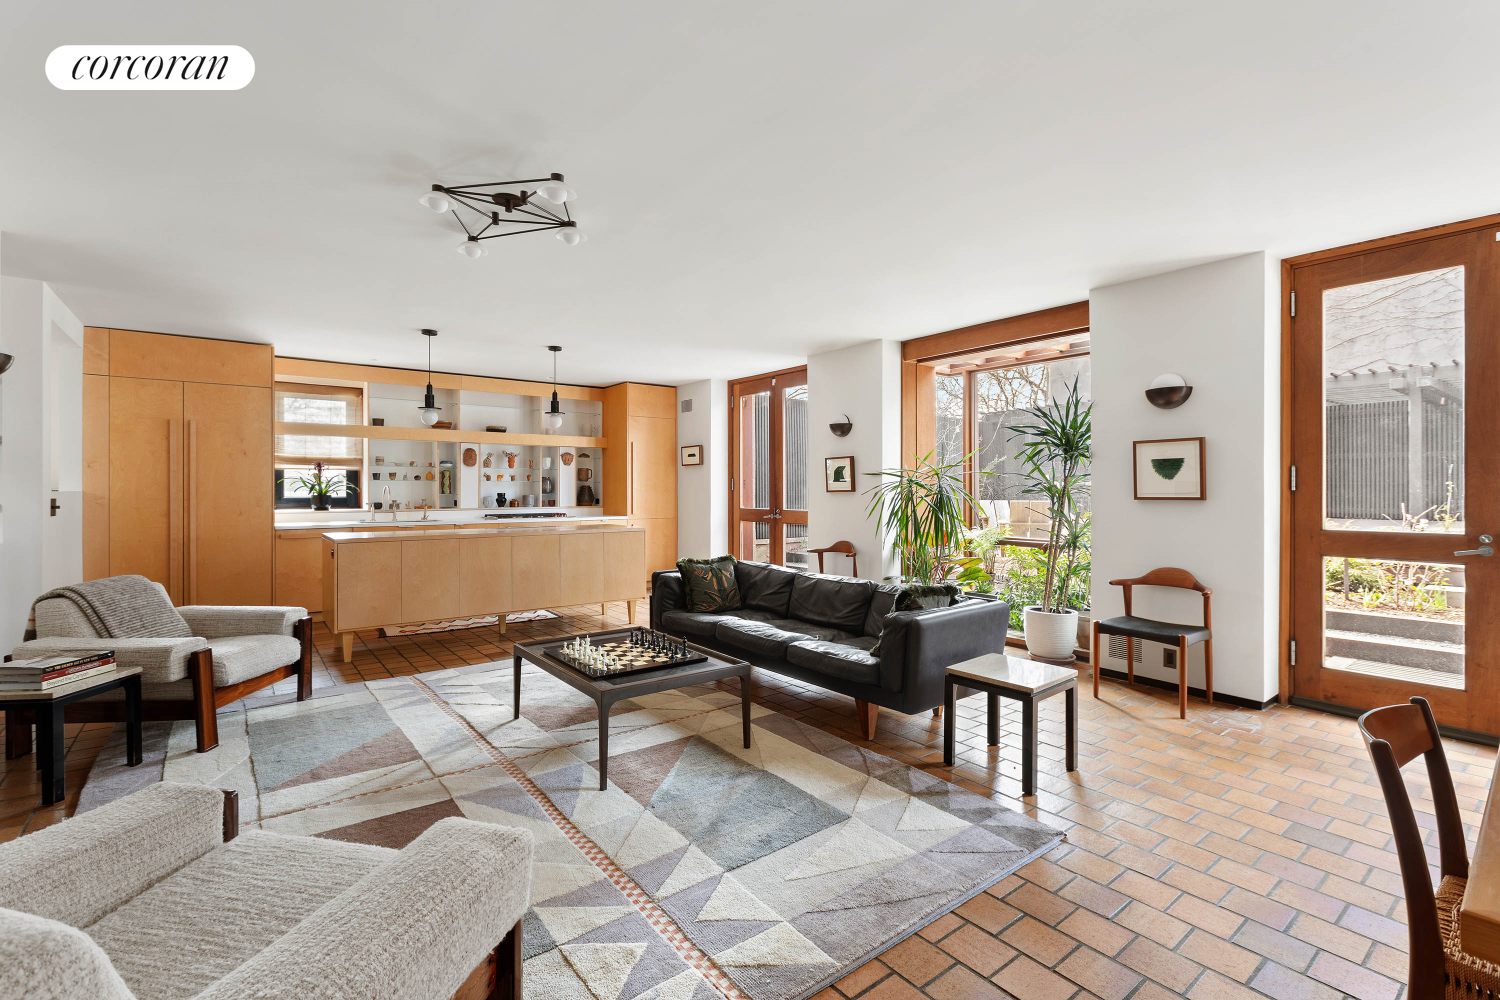 48 Willow Place, Brooklyn Heights, Brooklyn, New York - 5 Bedrooms  
4.5 Bathrooms  
15 Rooms - 